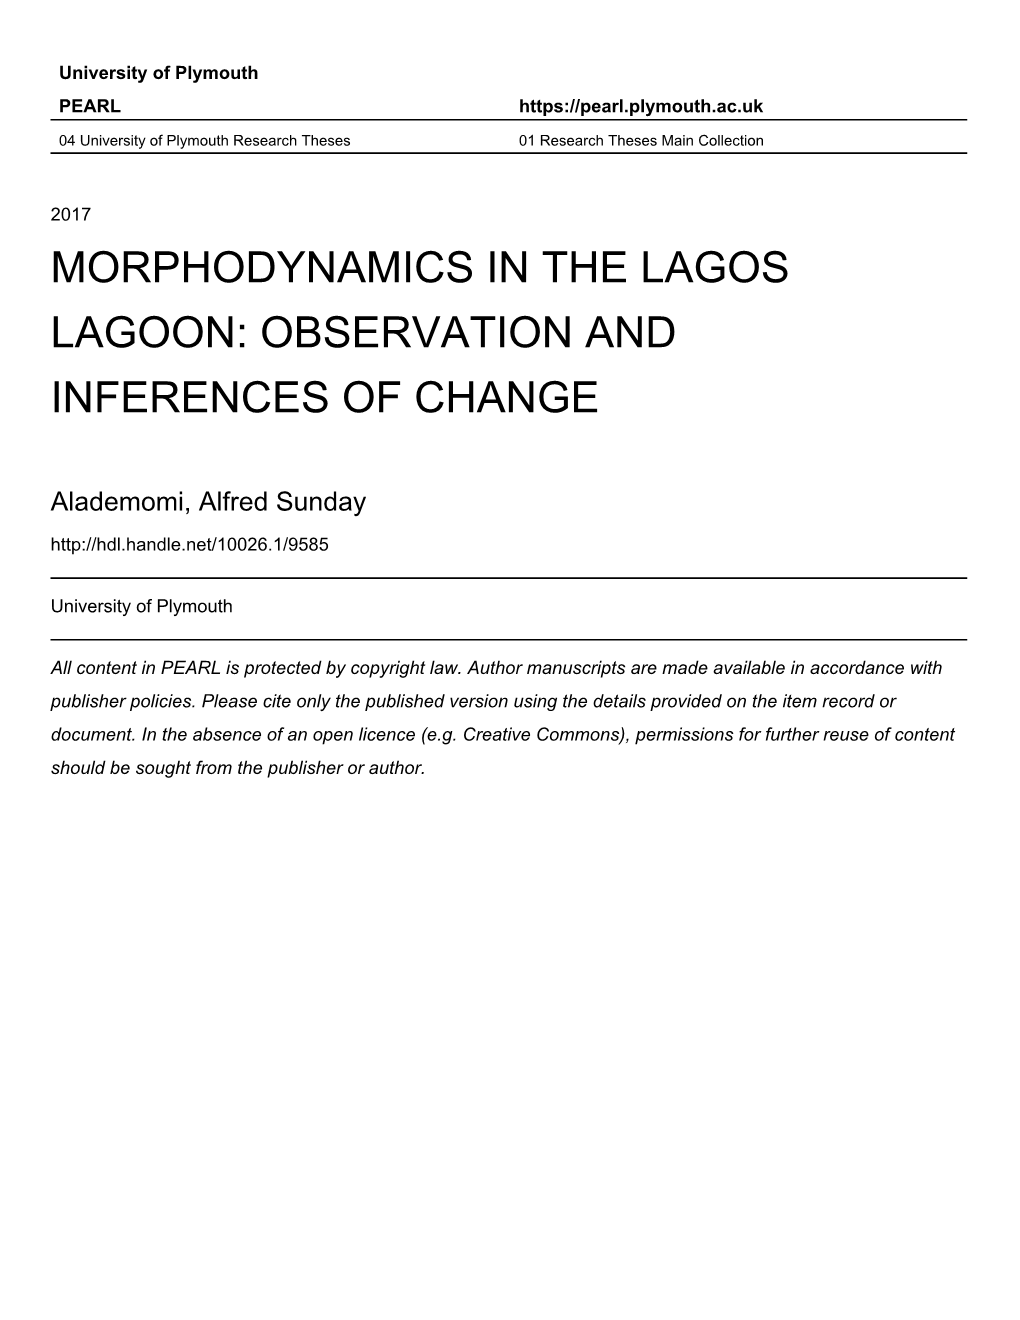 Morphodynamics in the Lagos Lagoon: Observation and Inferences of Change